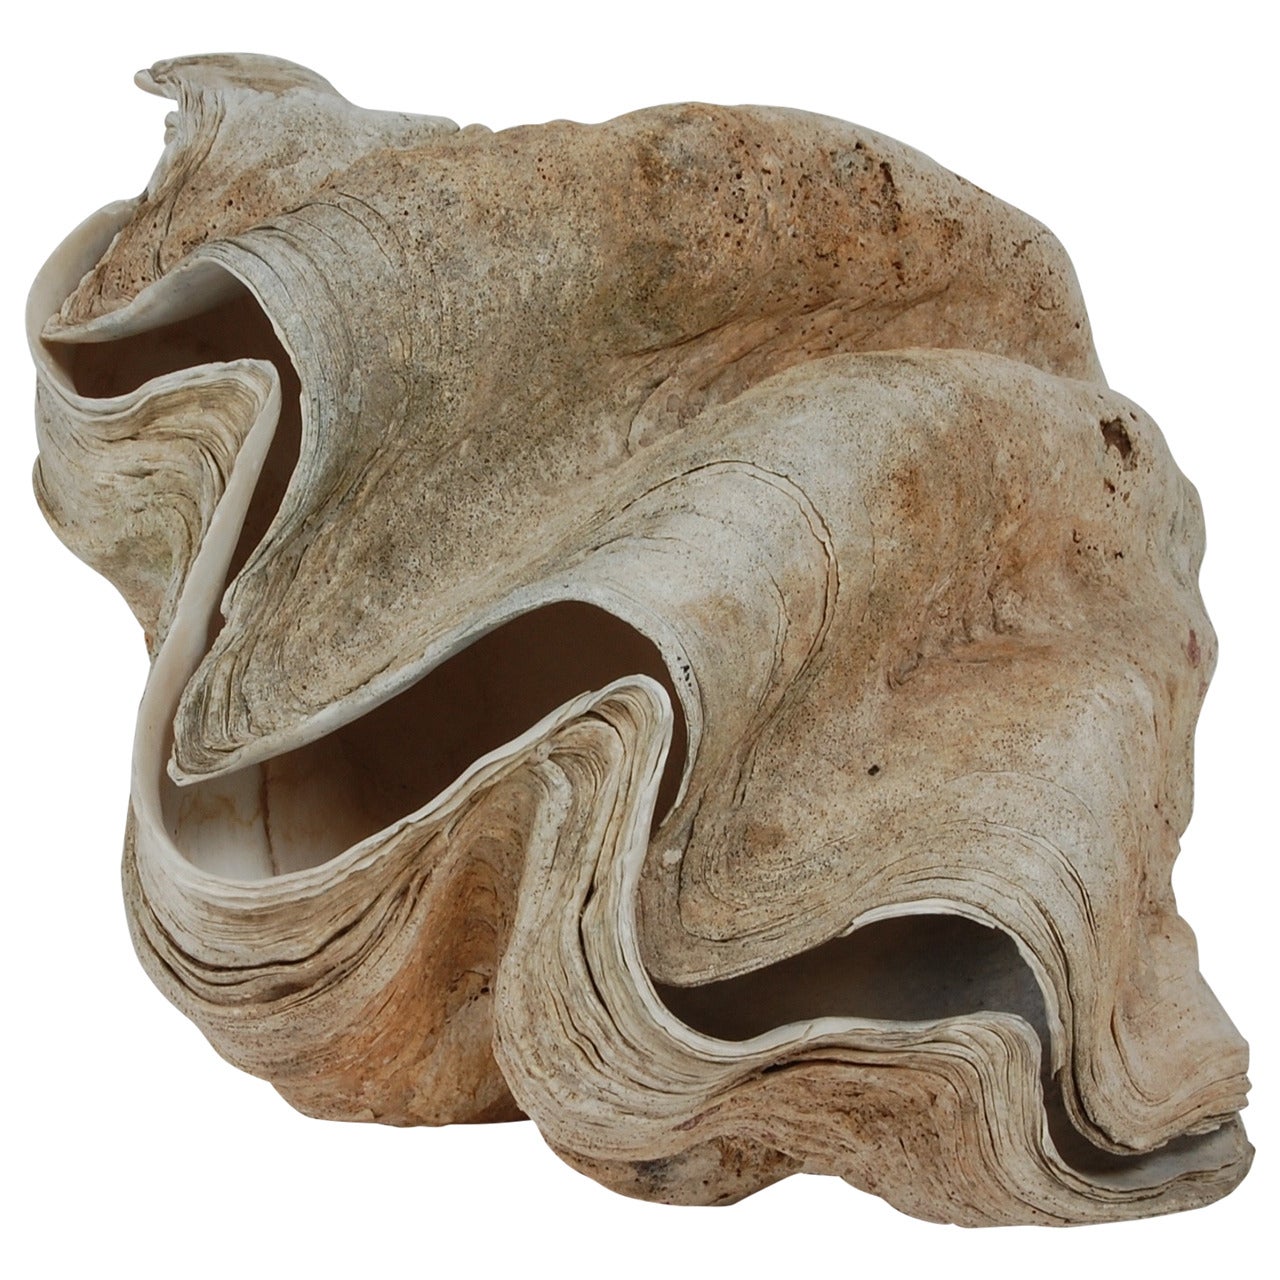 Matched Sides Giant Clam Shells "Tridacna Gigas"